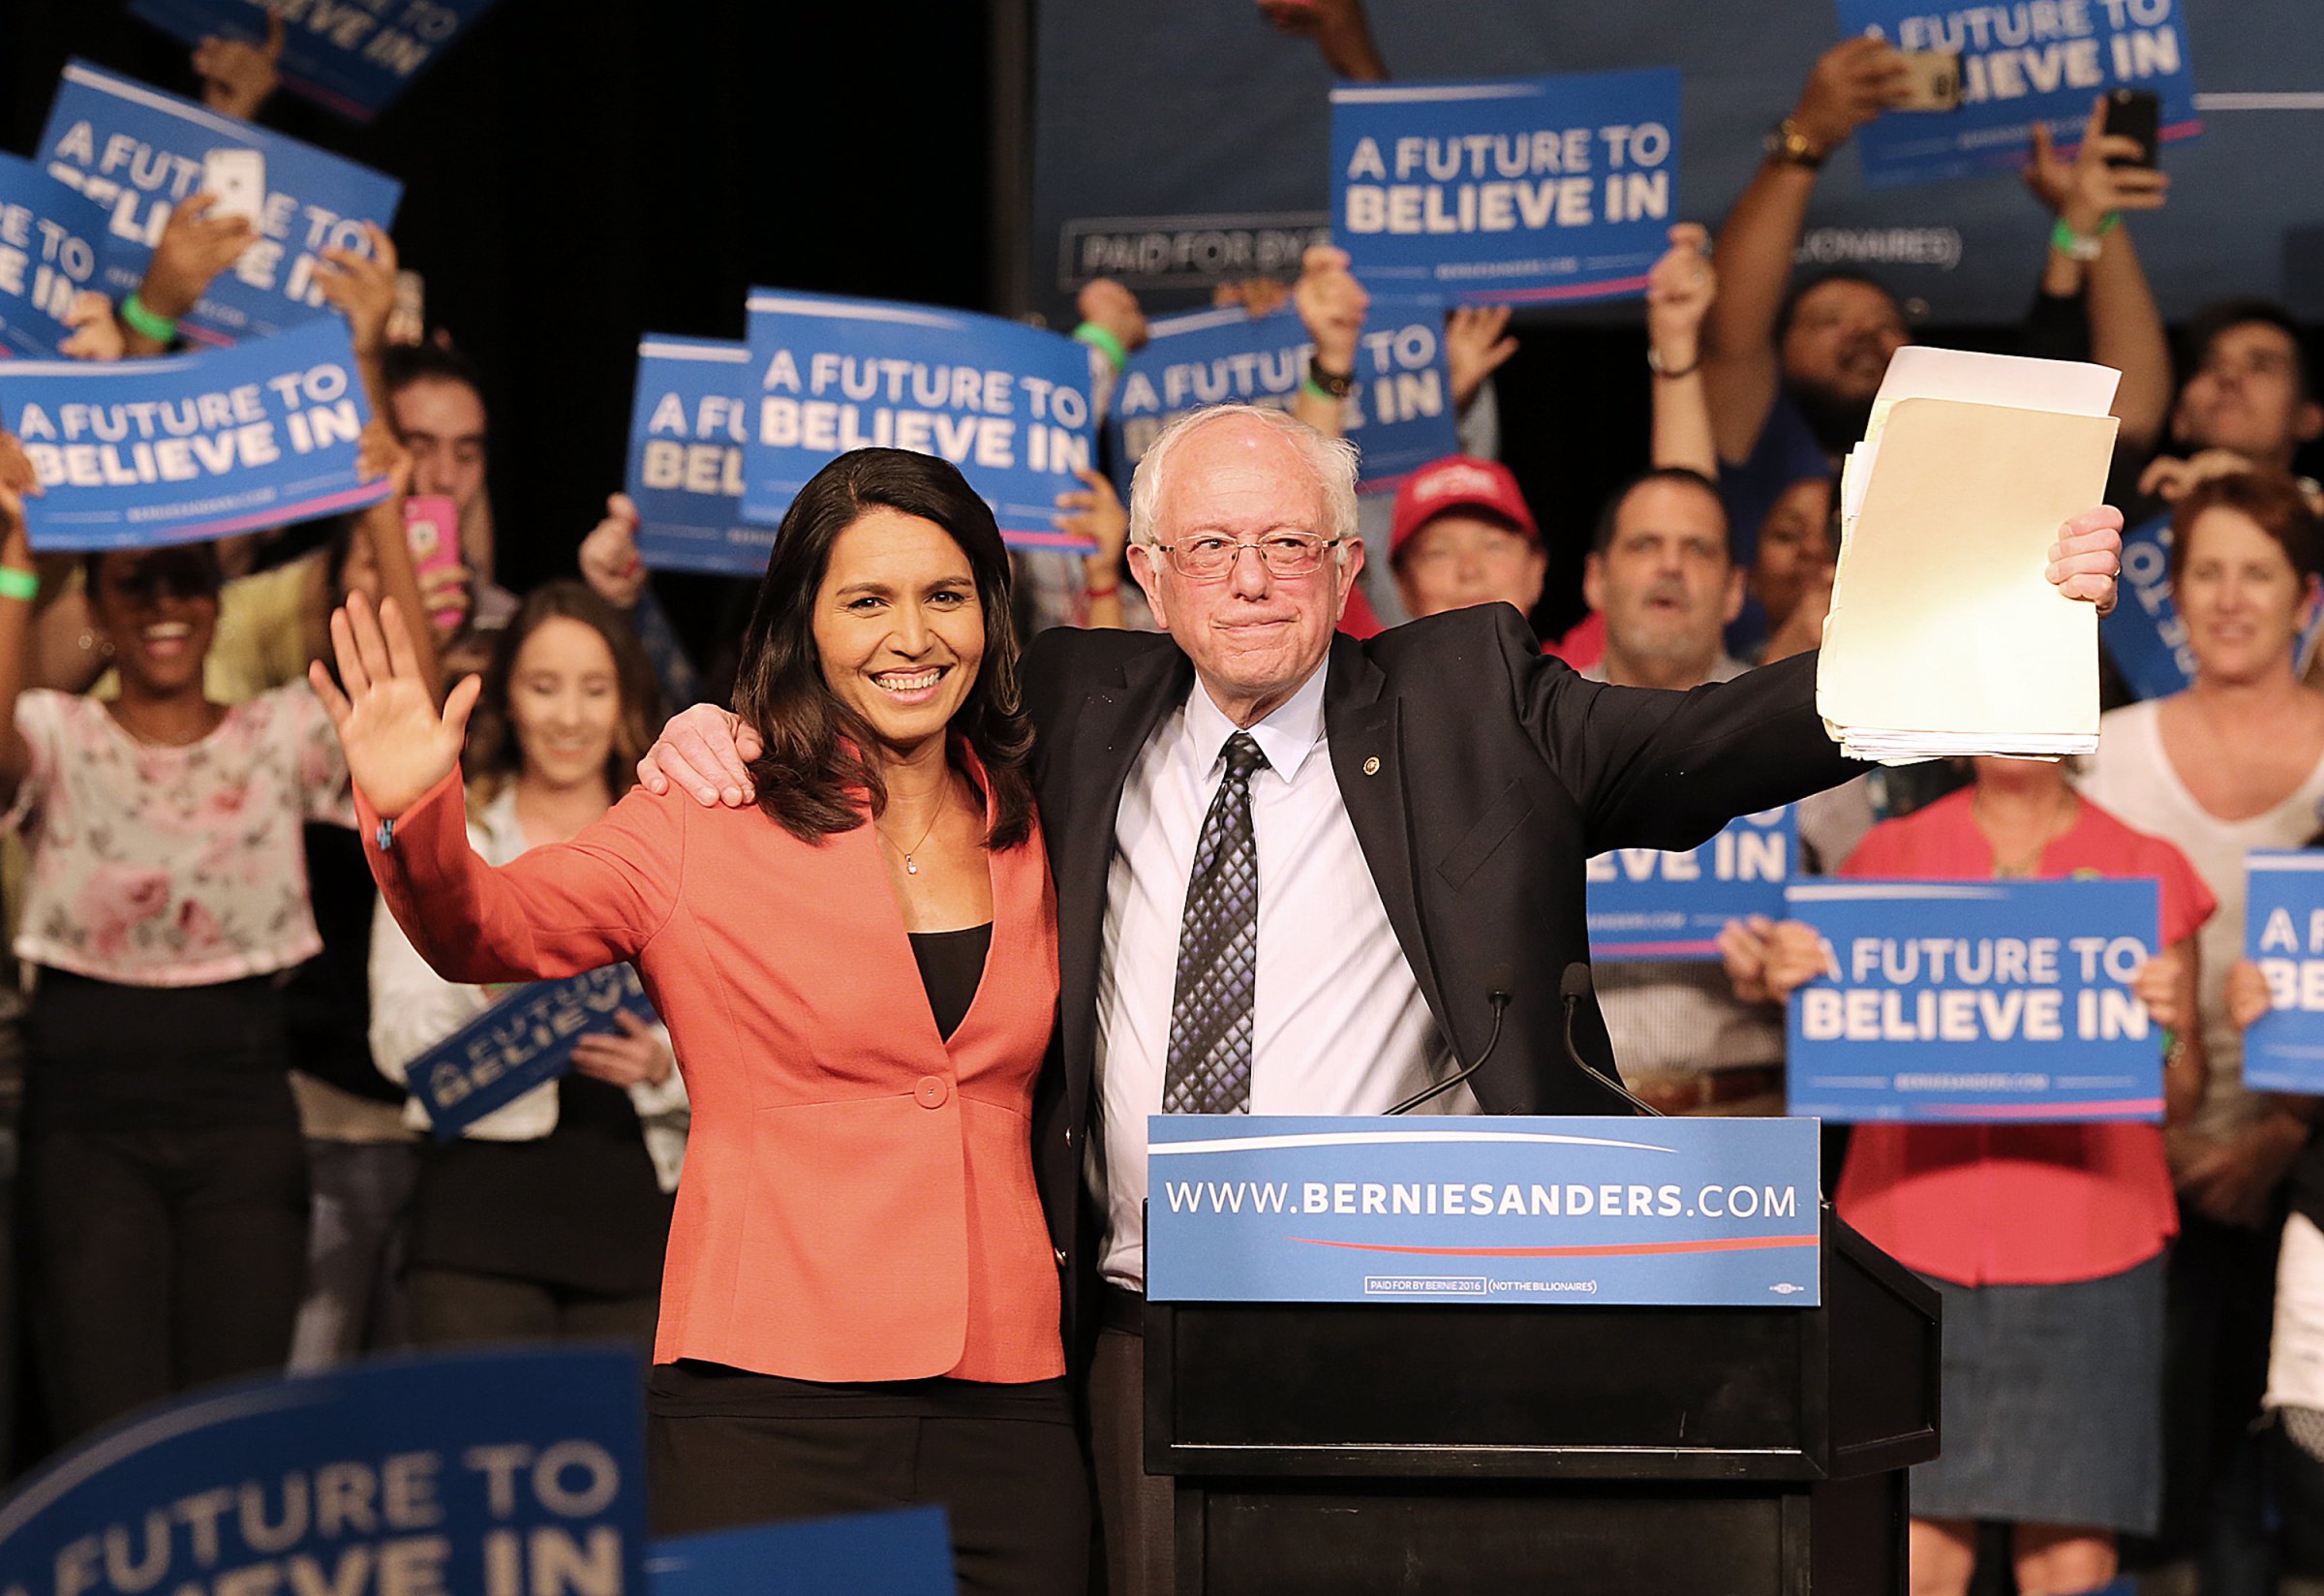 Rep. Tulsi Gabbard, D-Hawaii, and Democratic presidential candidate Sen. Bernie Sanders wave to supporters during a campaign event in Miami on Tuesday, March 8, 2016.